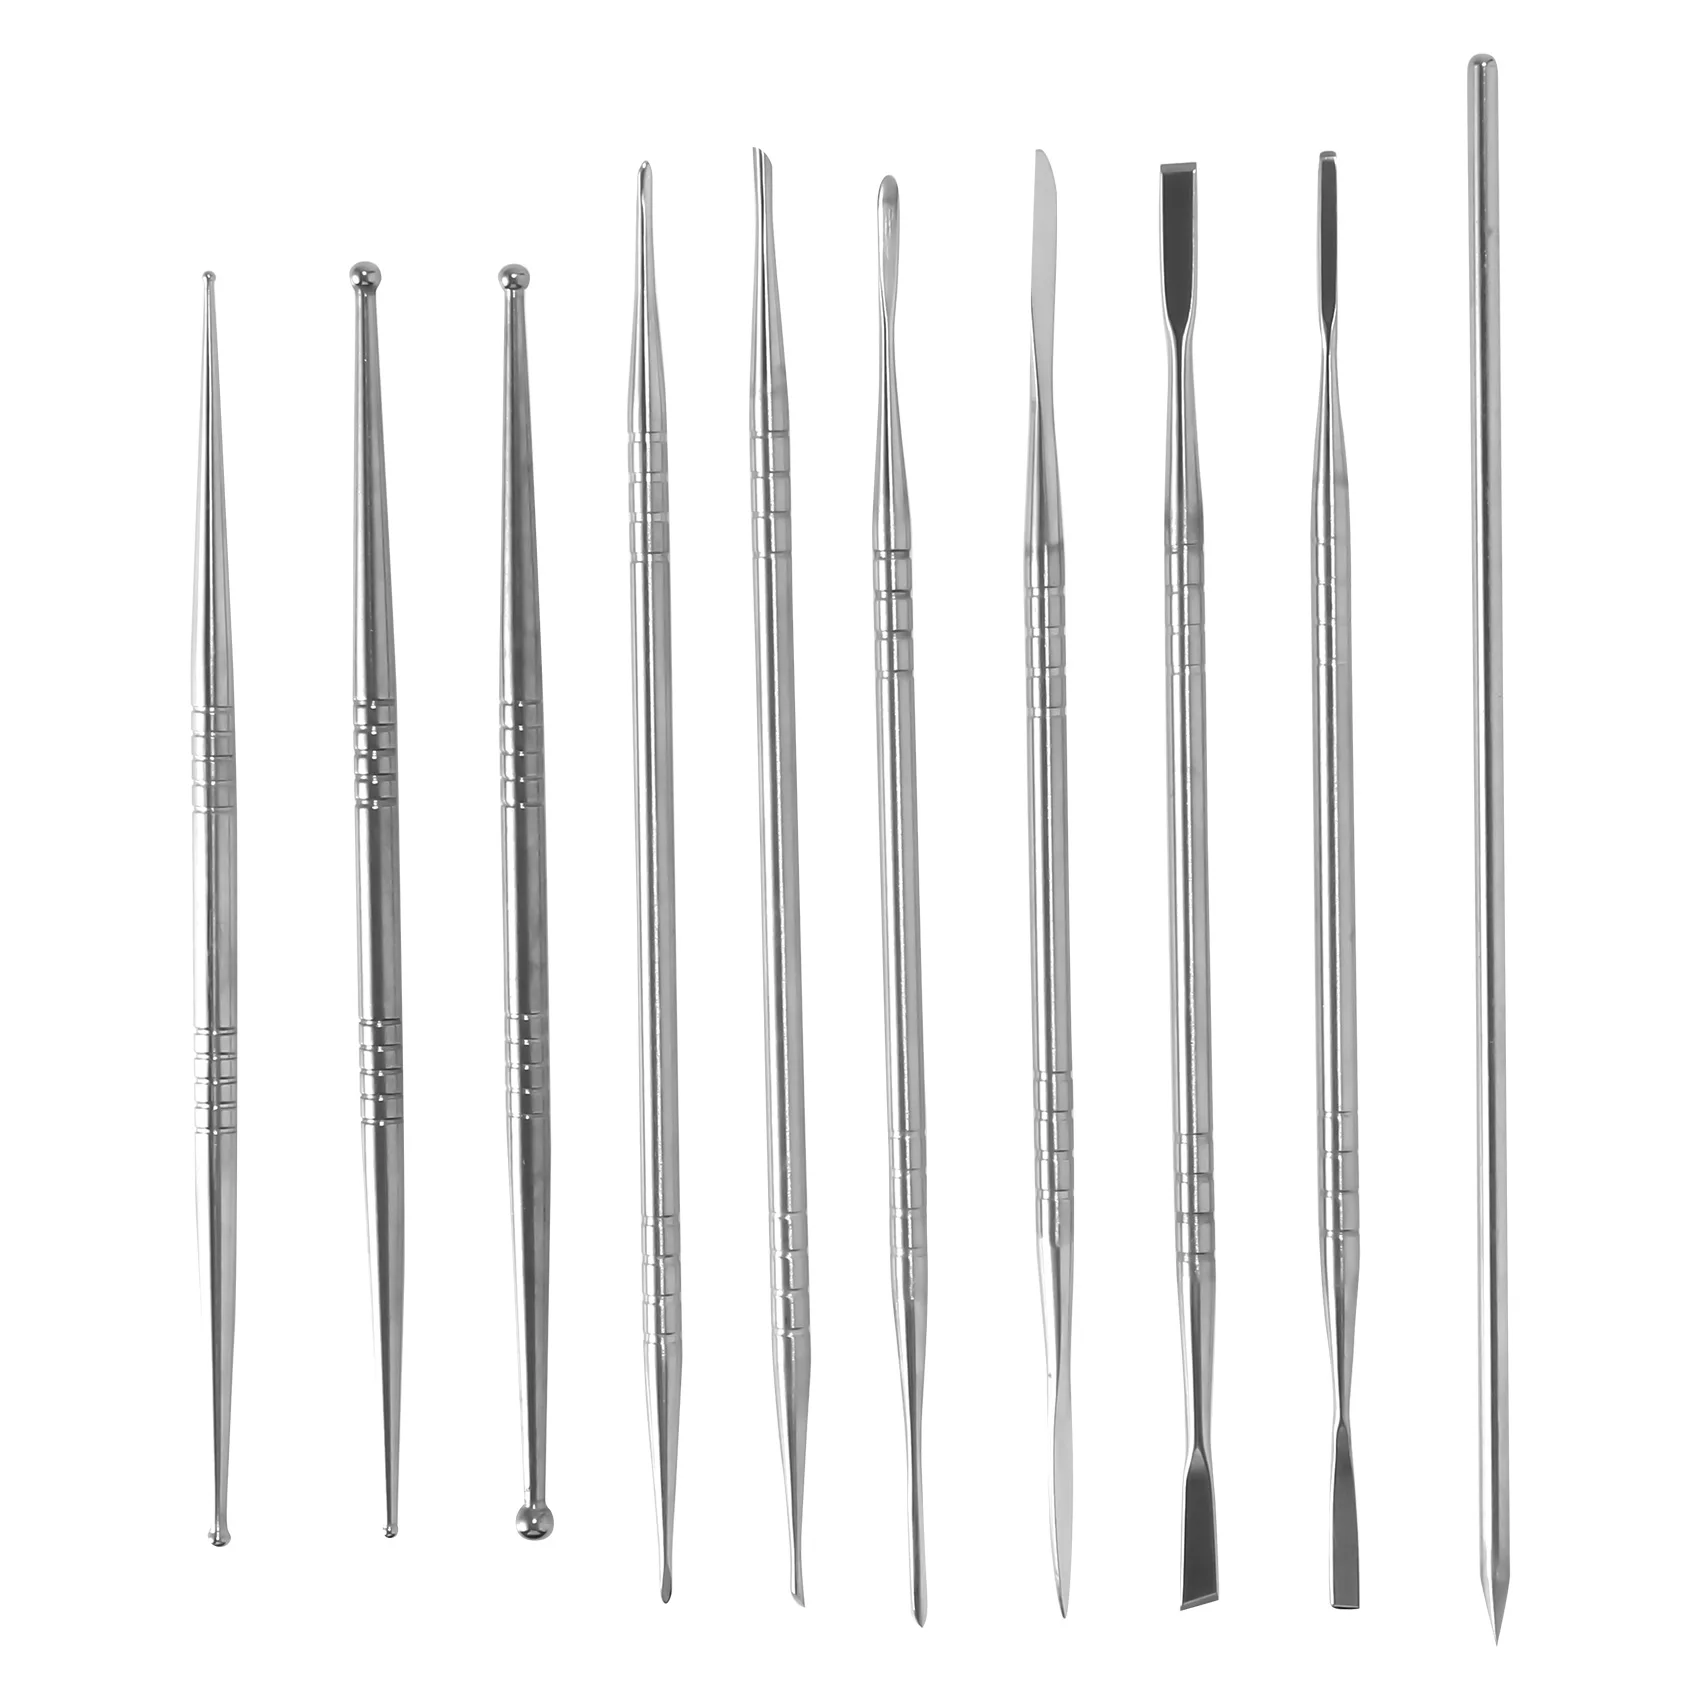 

10Pcs Stainless Steel Clay Sculpture Engrave Tools for Modeling Carving Crafts Ceramic Sculpting Tools